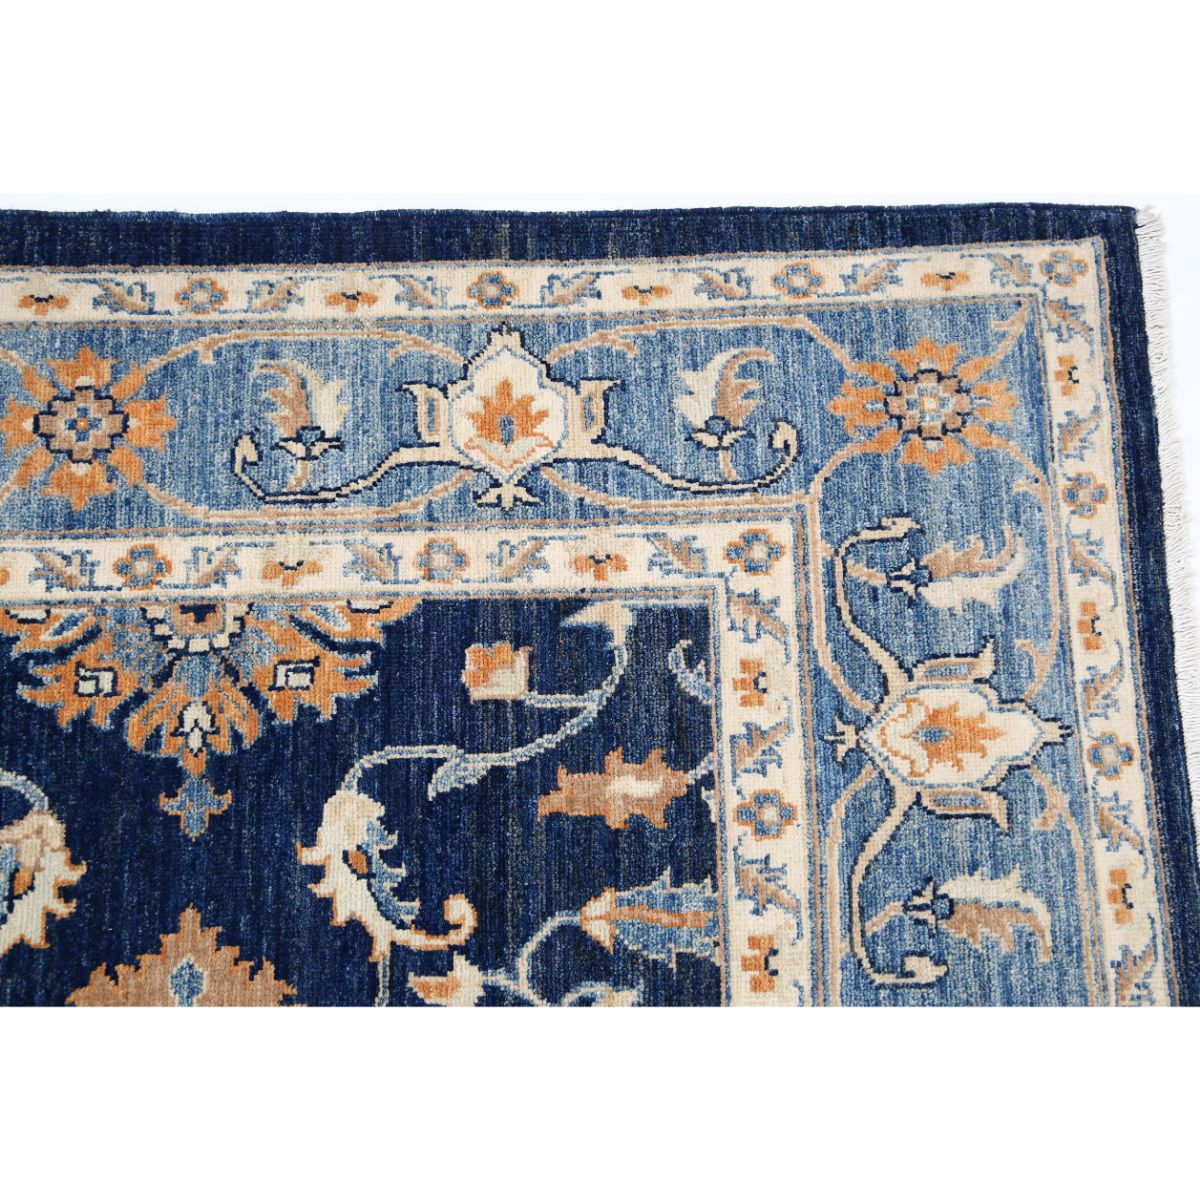 Ziegler 5'11" X 8'9" Wool Hand-Knotted Rug